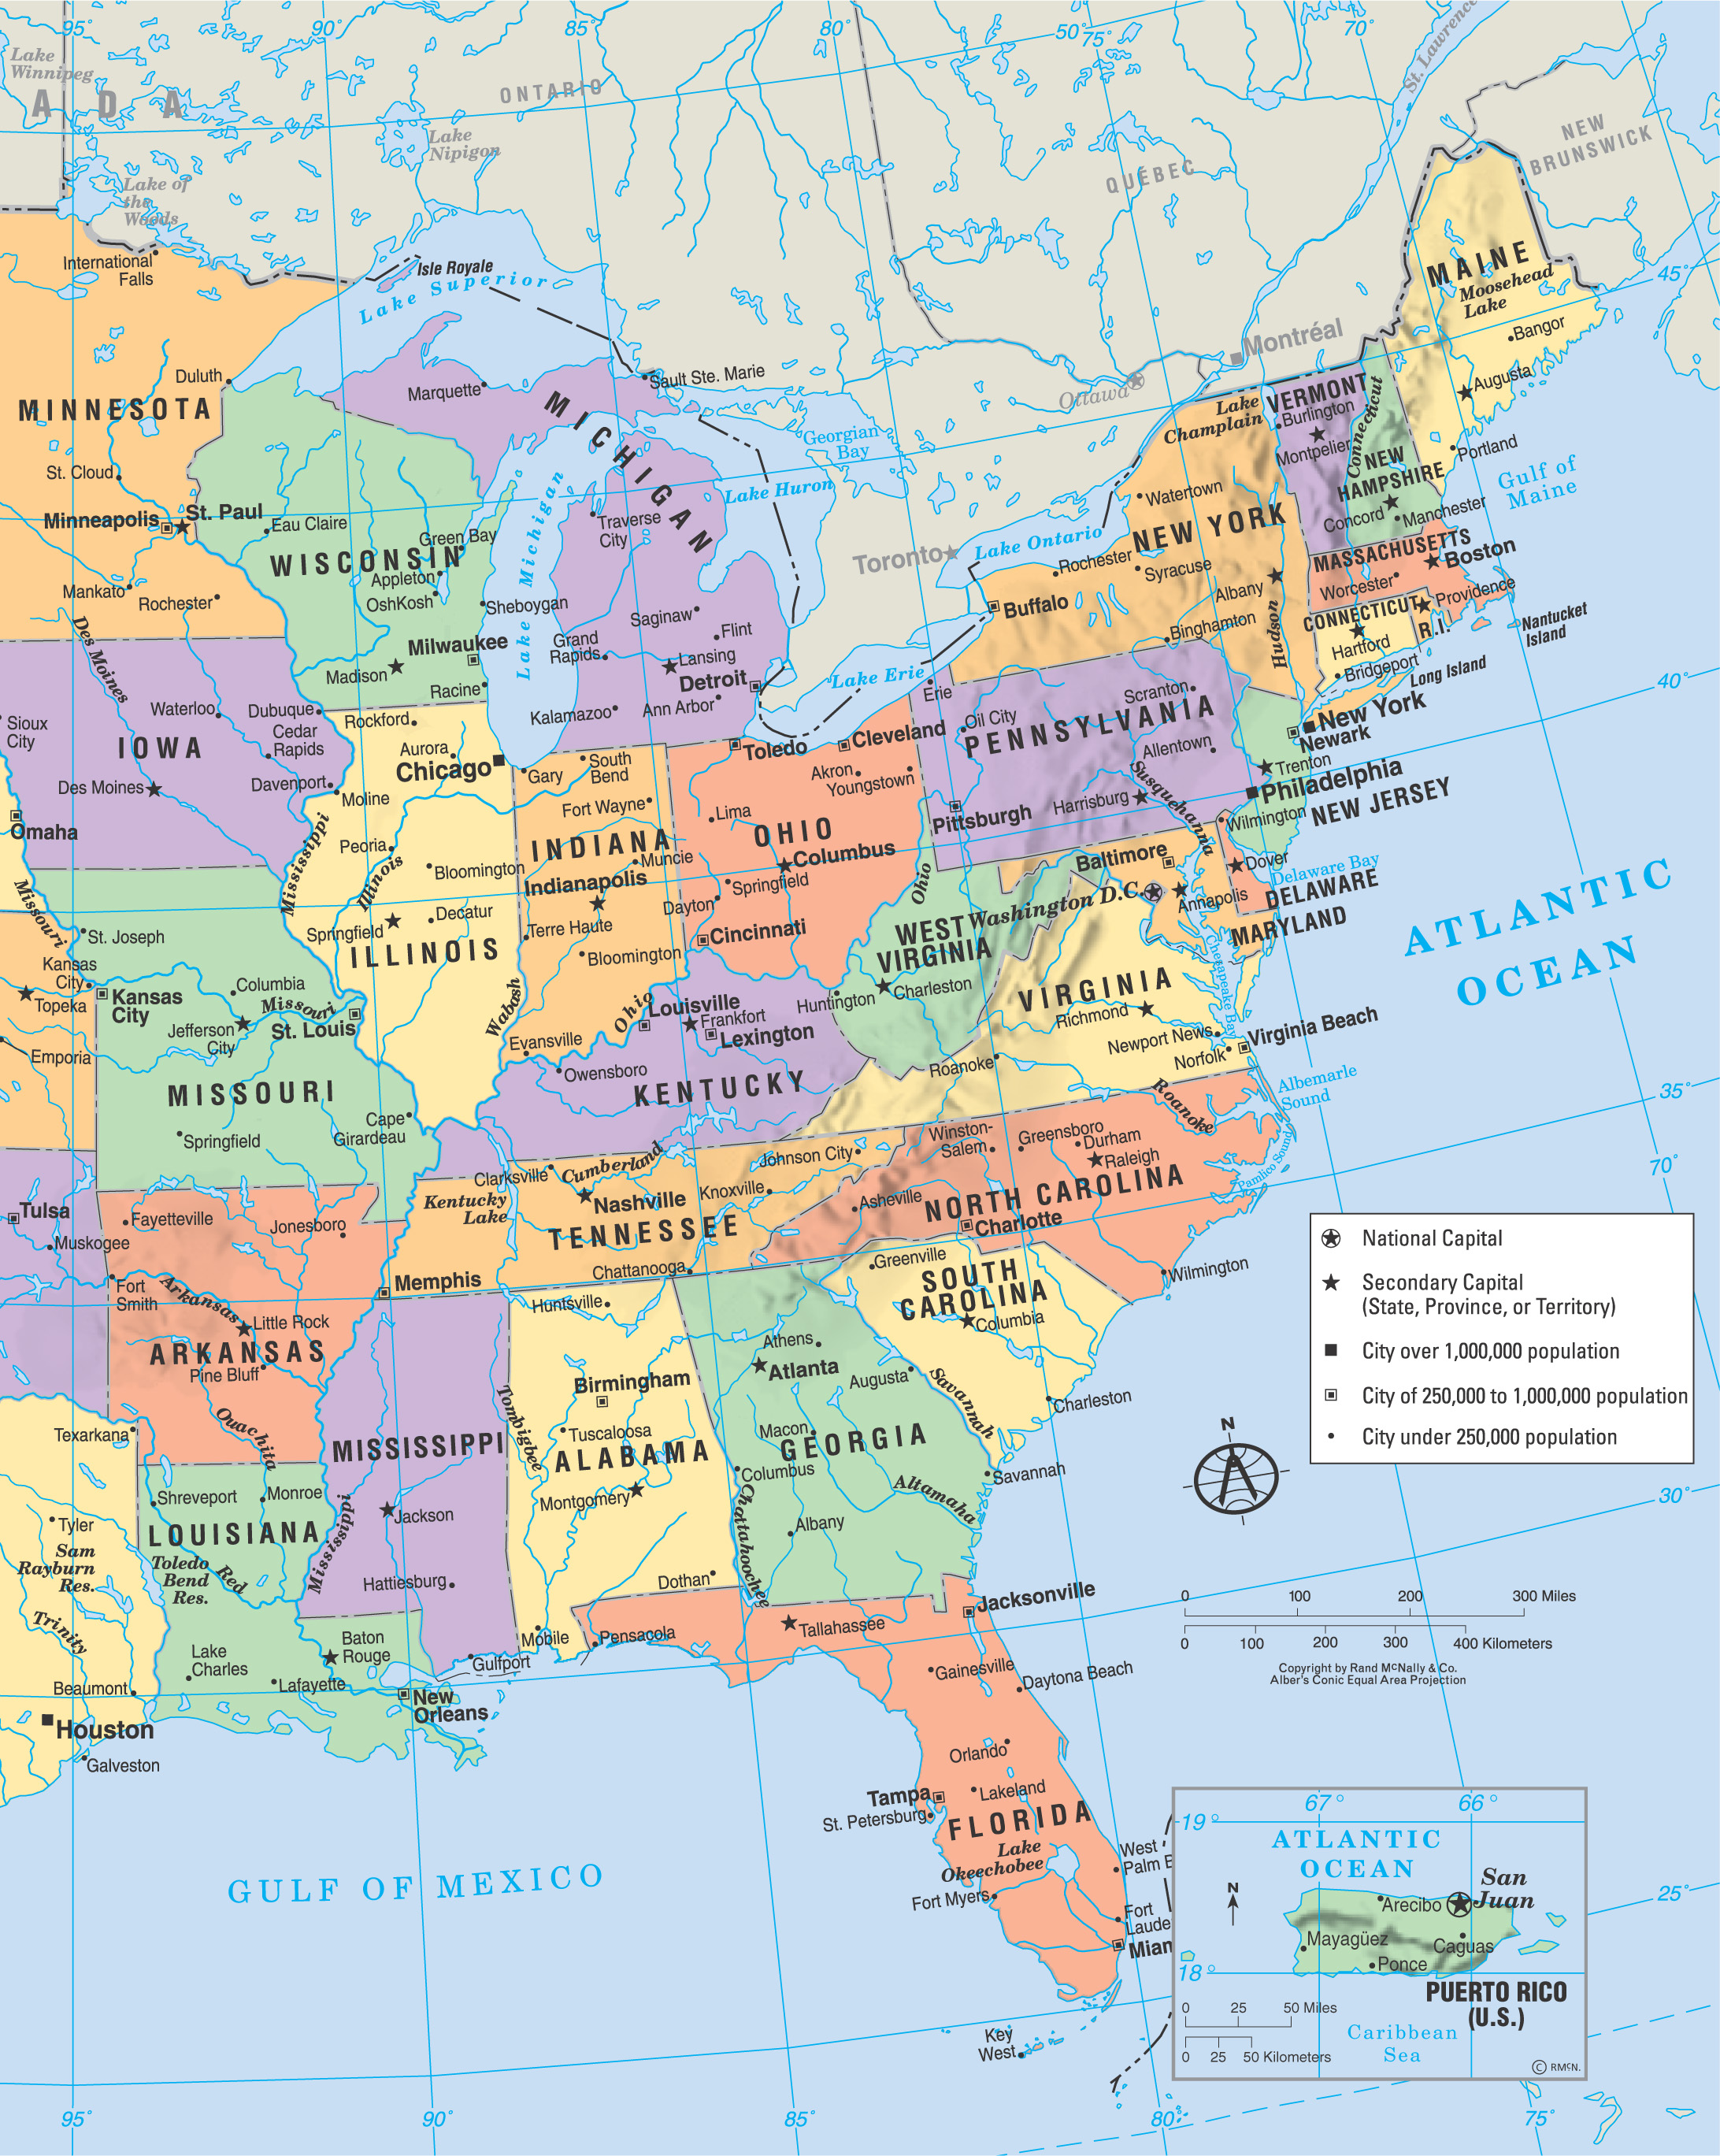 political map of United States shows state borders, capitals and major cites